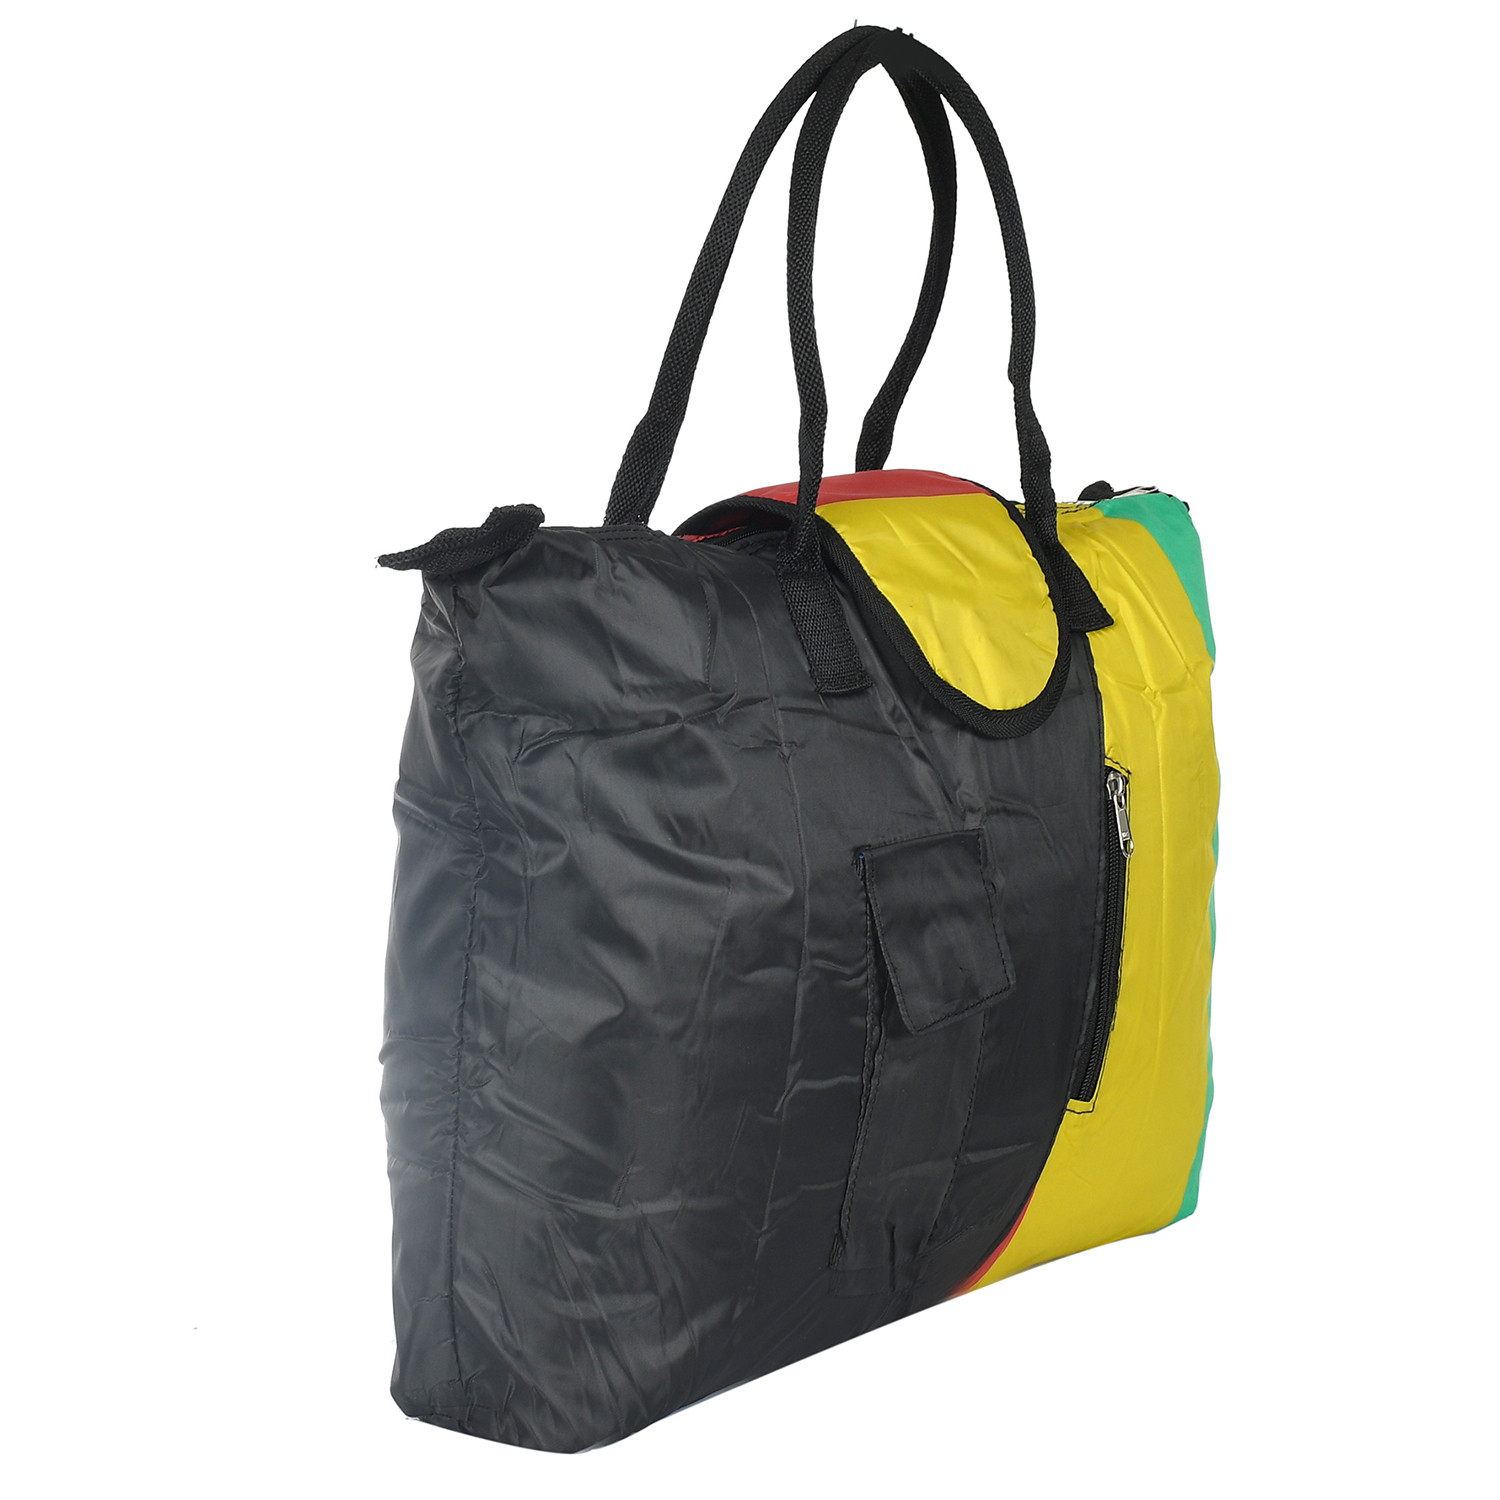 Kuber Industries Shopping Bag For Grocery|Parachute Foldable Shopping Bag| Bag for Vegetables,Fruits With Front Side Money & Zipper Pocket (Assorted)